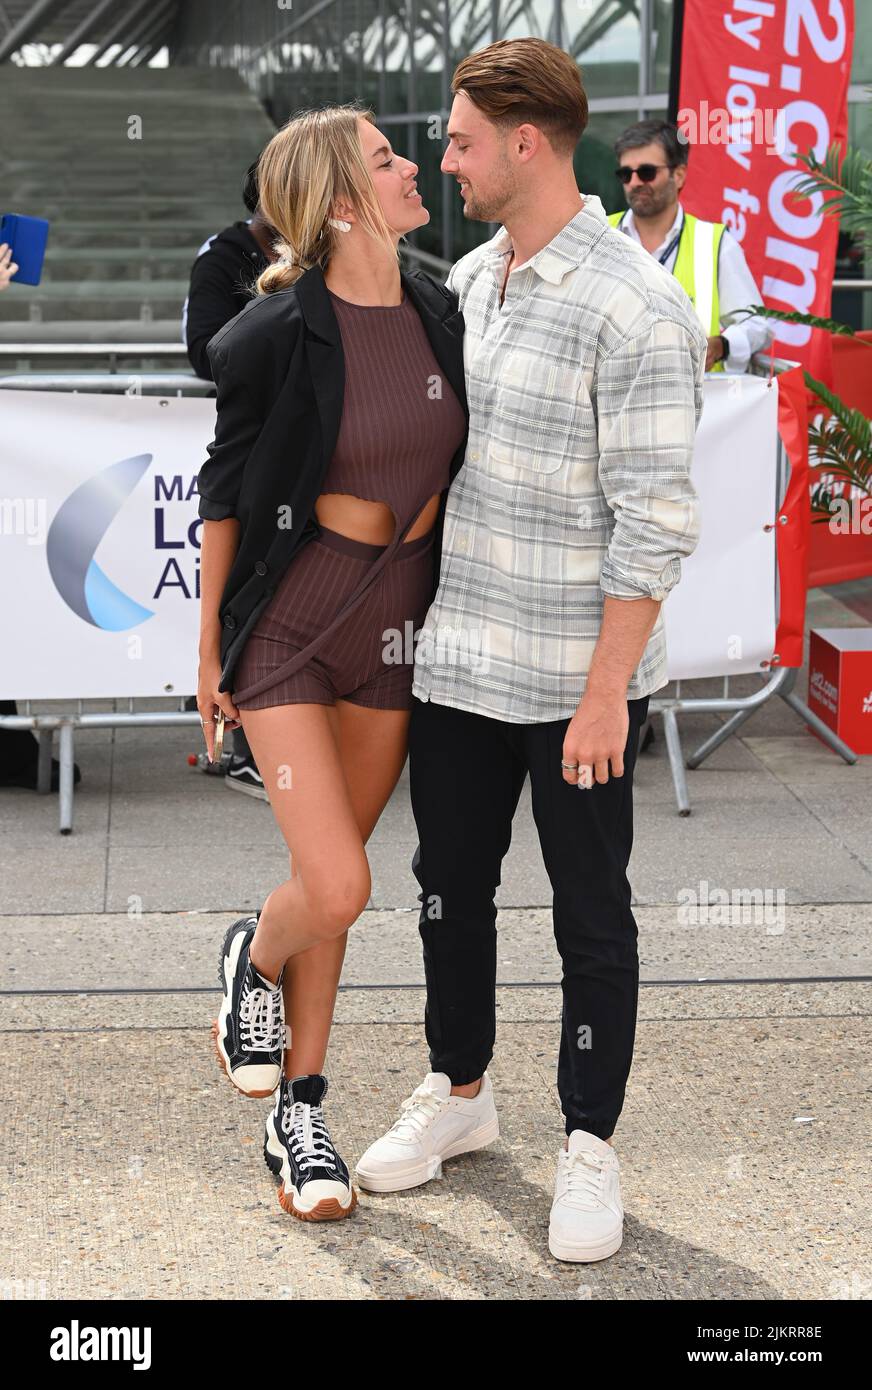 Stansted, UK. 03rd Aug, 2022. August 3rd, 2022. London, UK. Love Island 2022 contestants Tasha Ghouri and Andrew Le Page arriving at Stansted Airport. Credit: Doug Peters/Alamy Live News Stock Photo